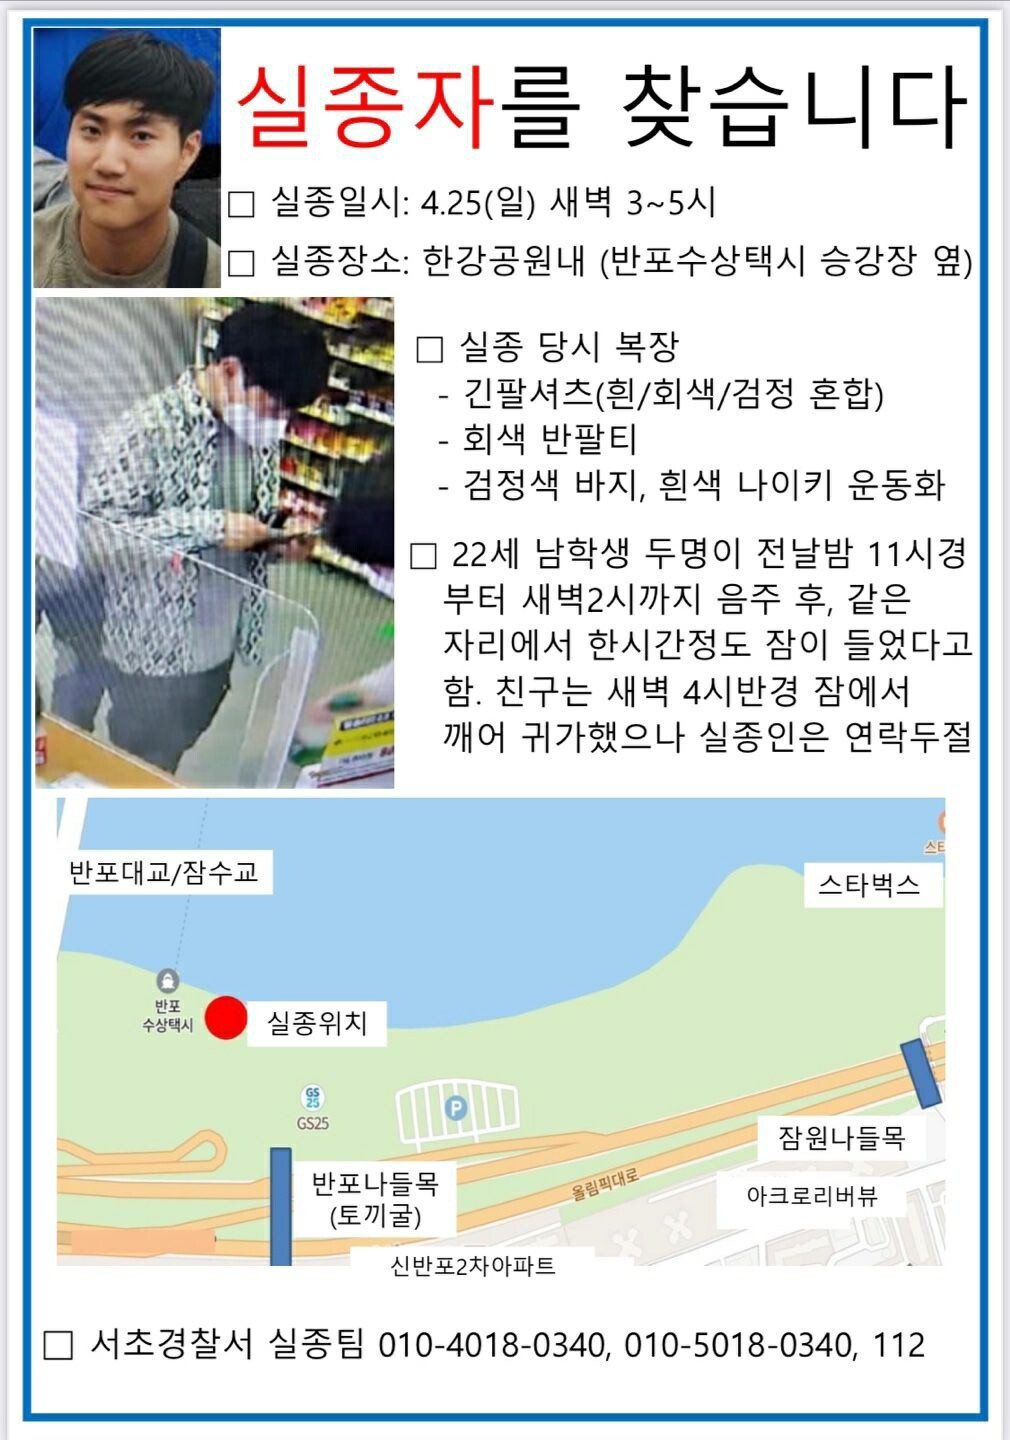 A college student who slept at Han River Park has been missing for four days.a police investigation